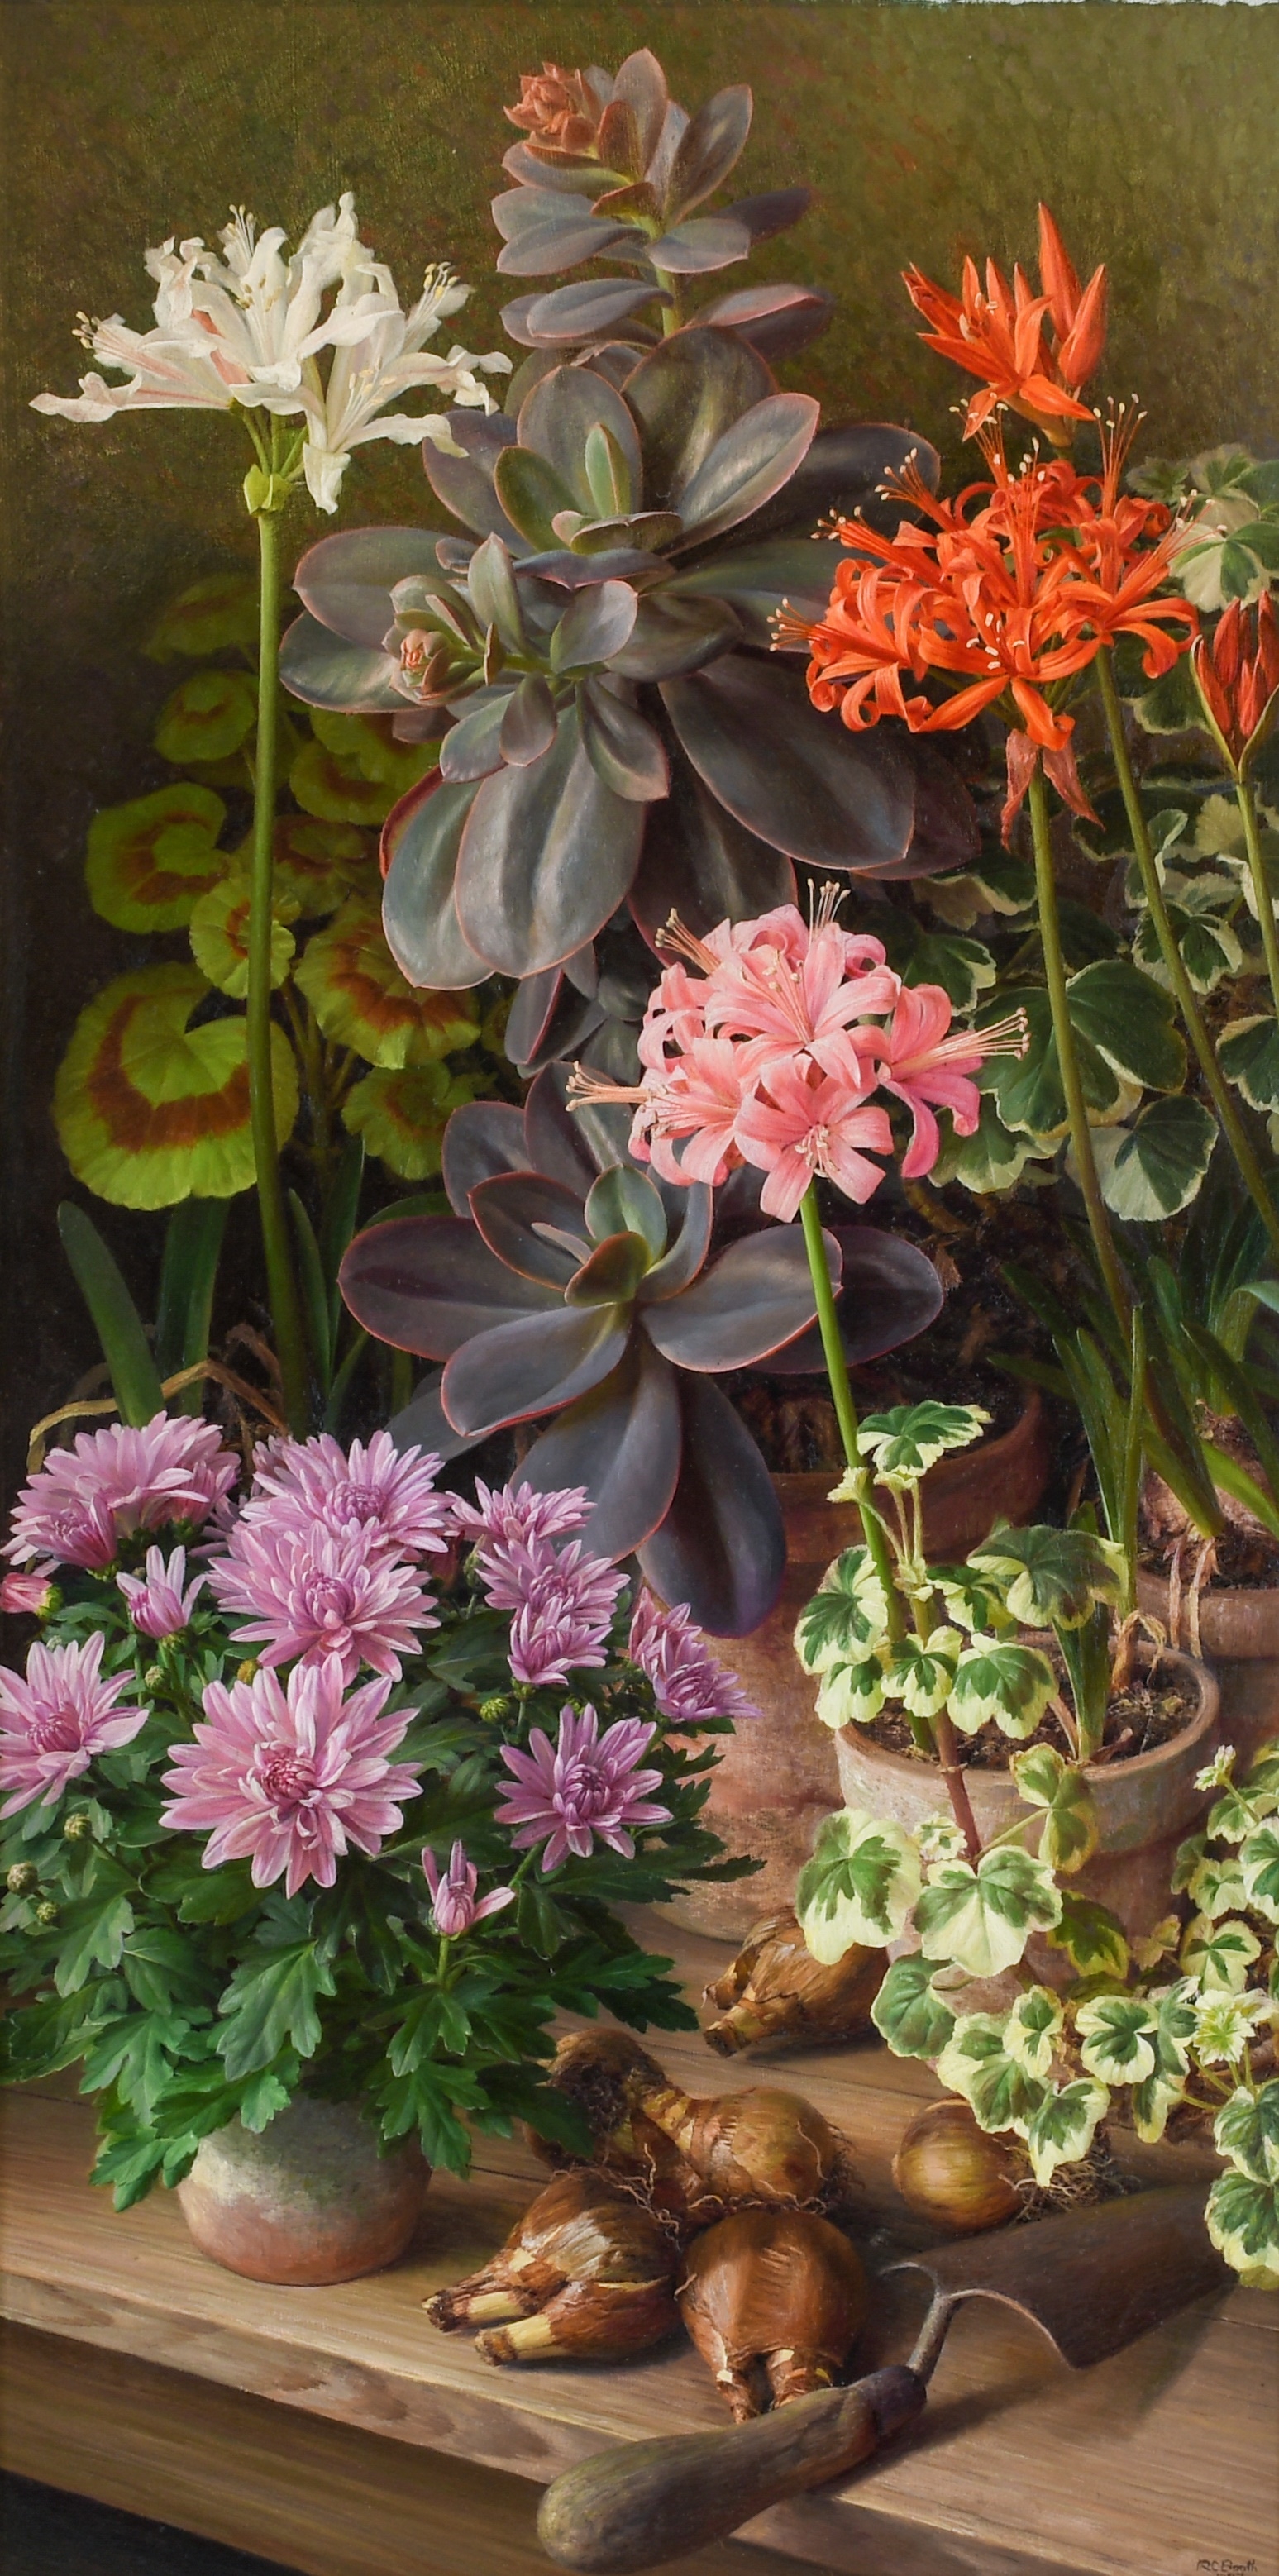 “October Flowers” by Raymond Booth, 1987